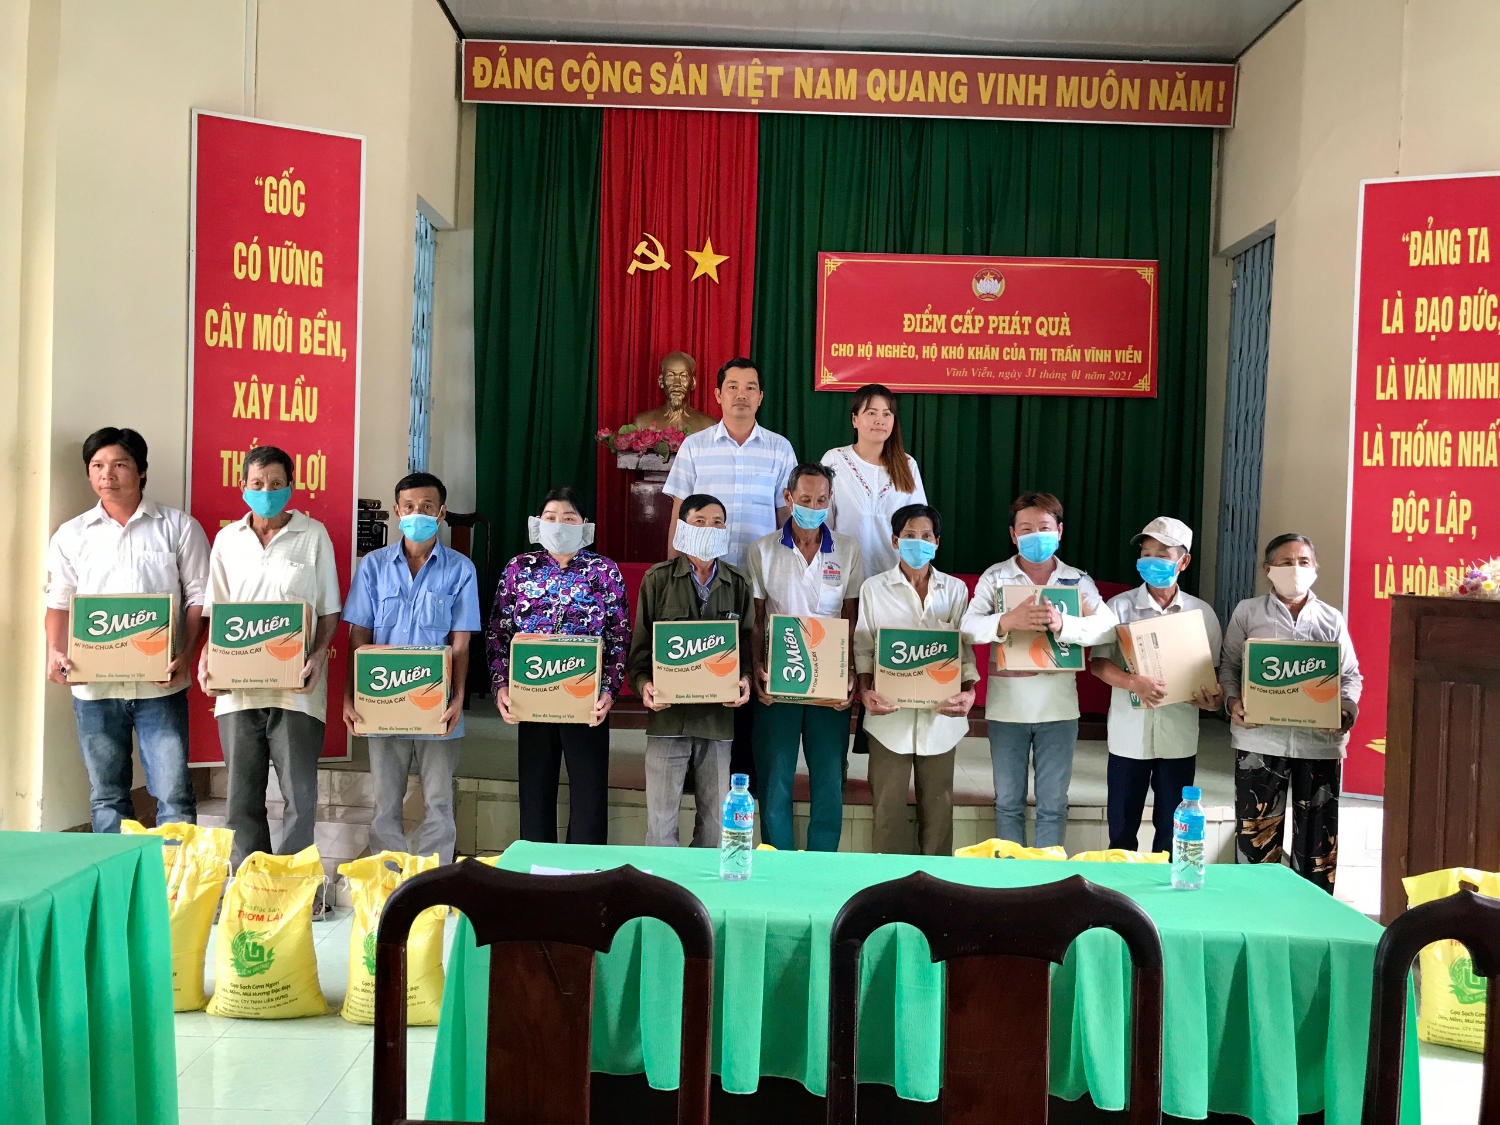 Ms. Tran Thi Hong Xet - Taiwanese overseas Vietnamese gave Tet gifts to poor and disadvantaged households